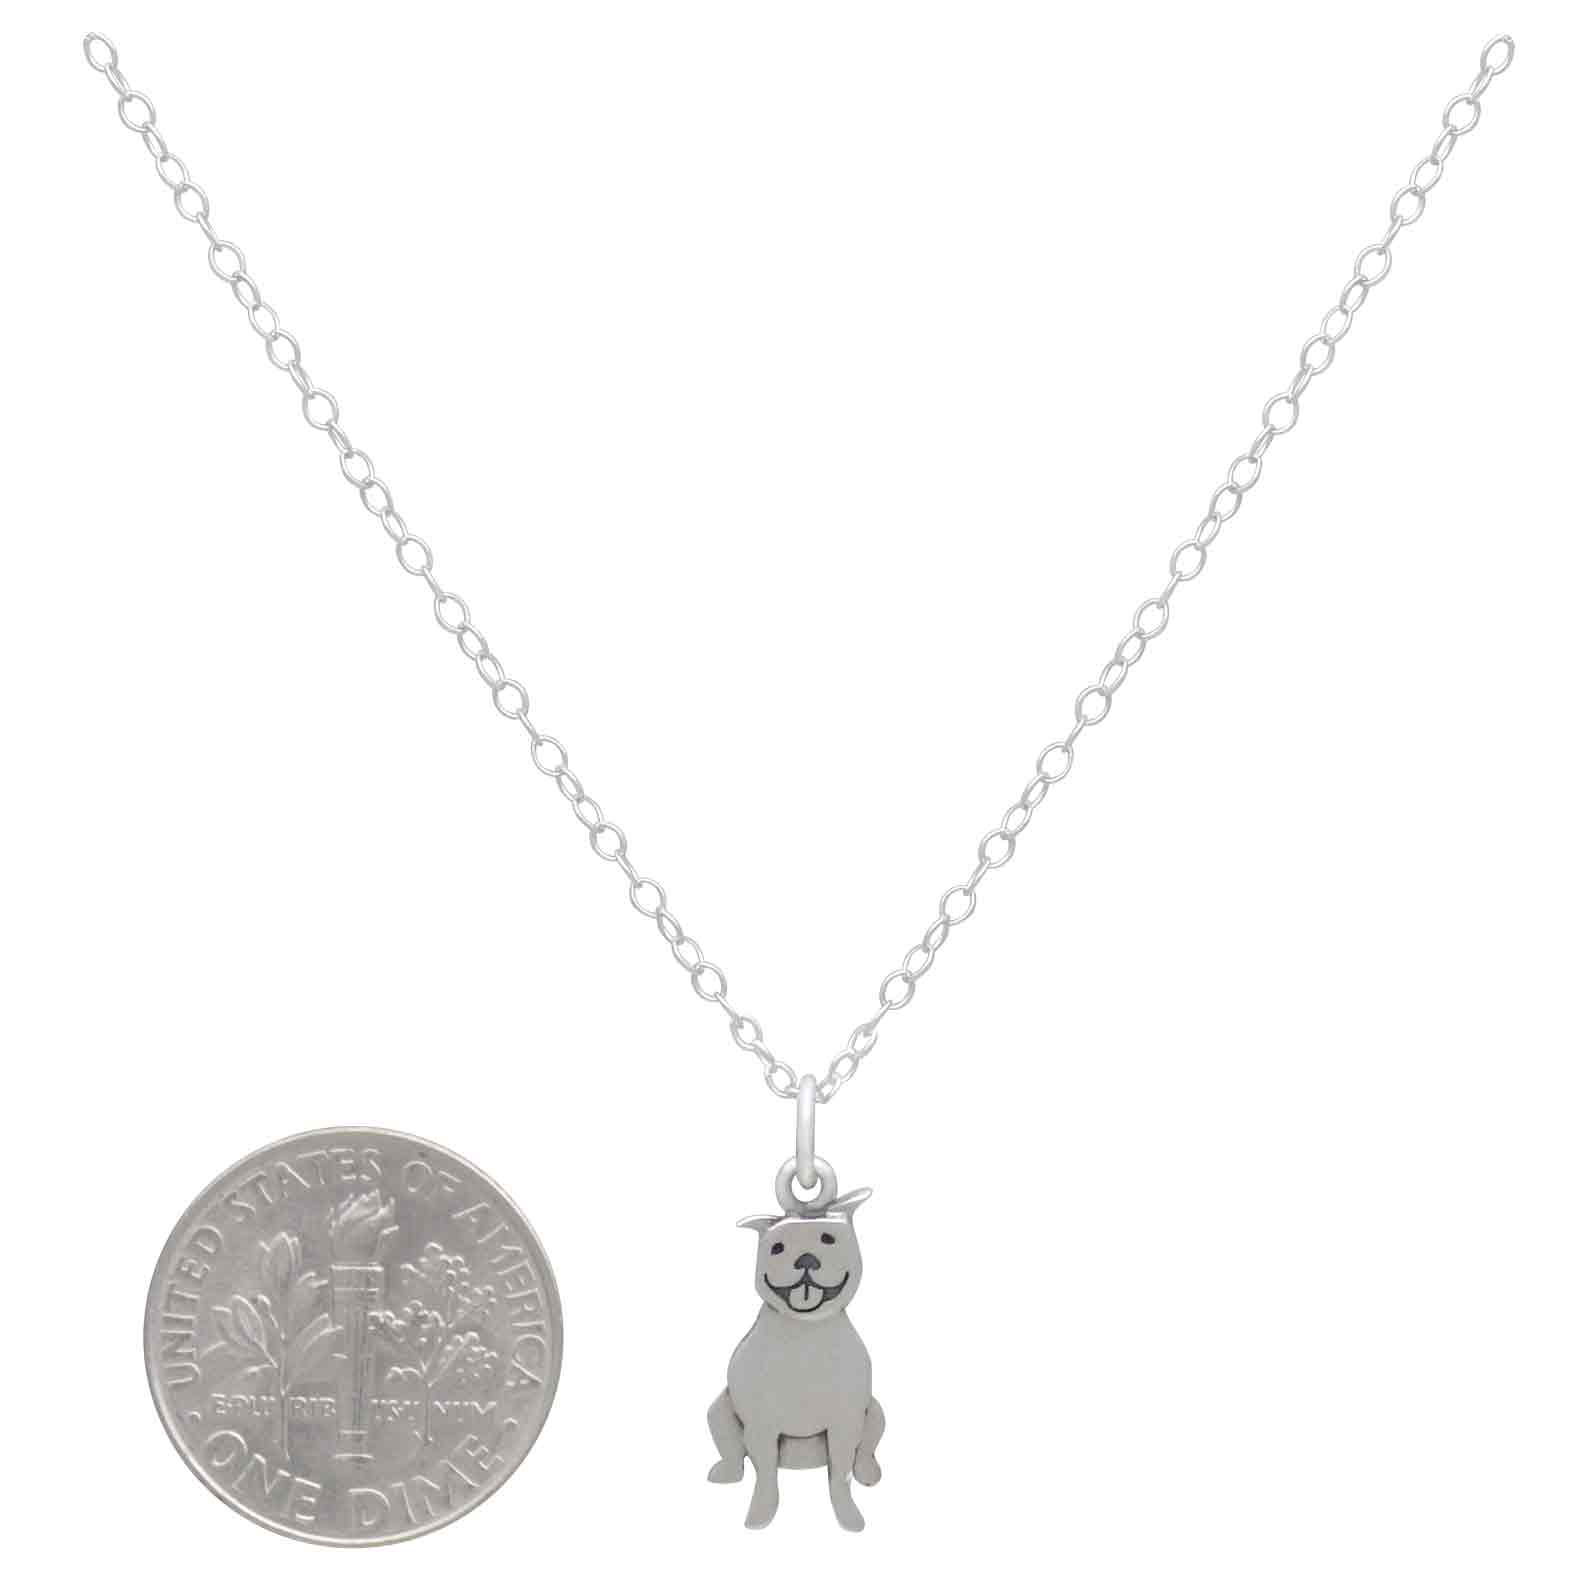 Sterling Silver Pitbull Dog Necklace 18 Inch